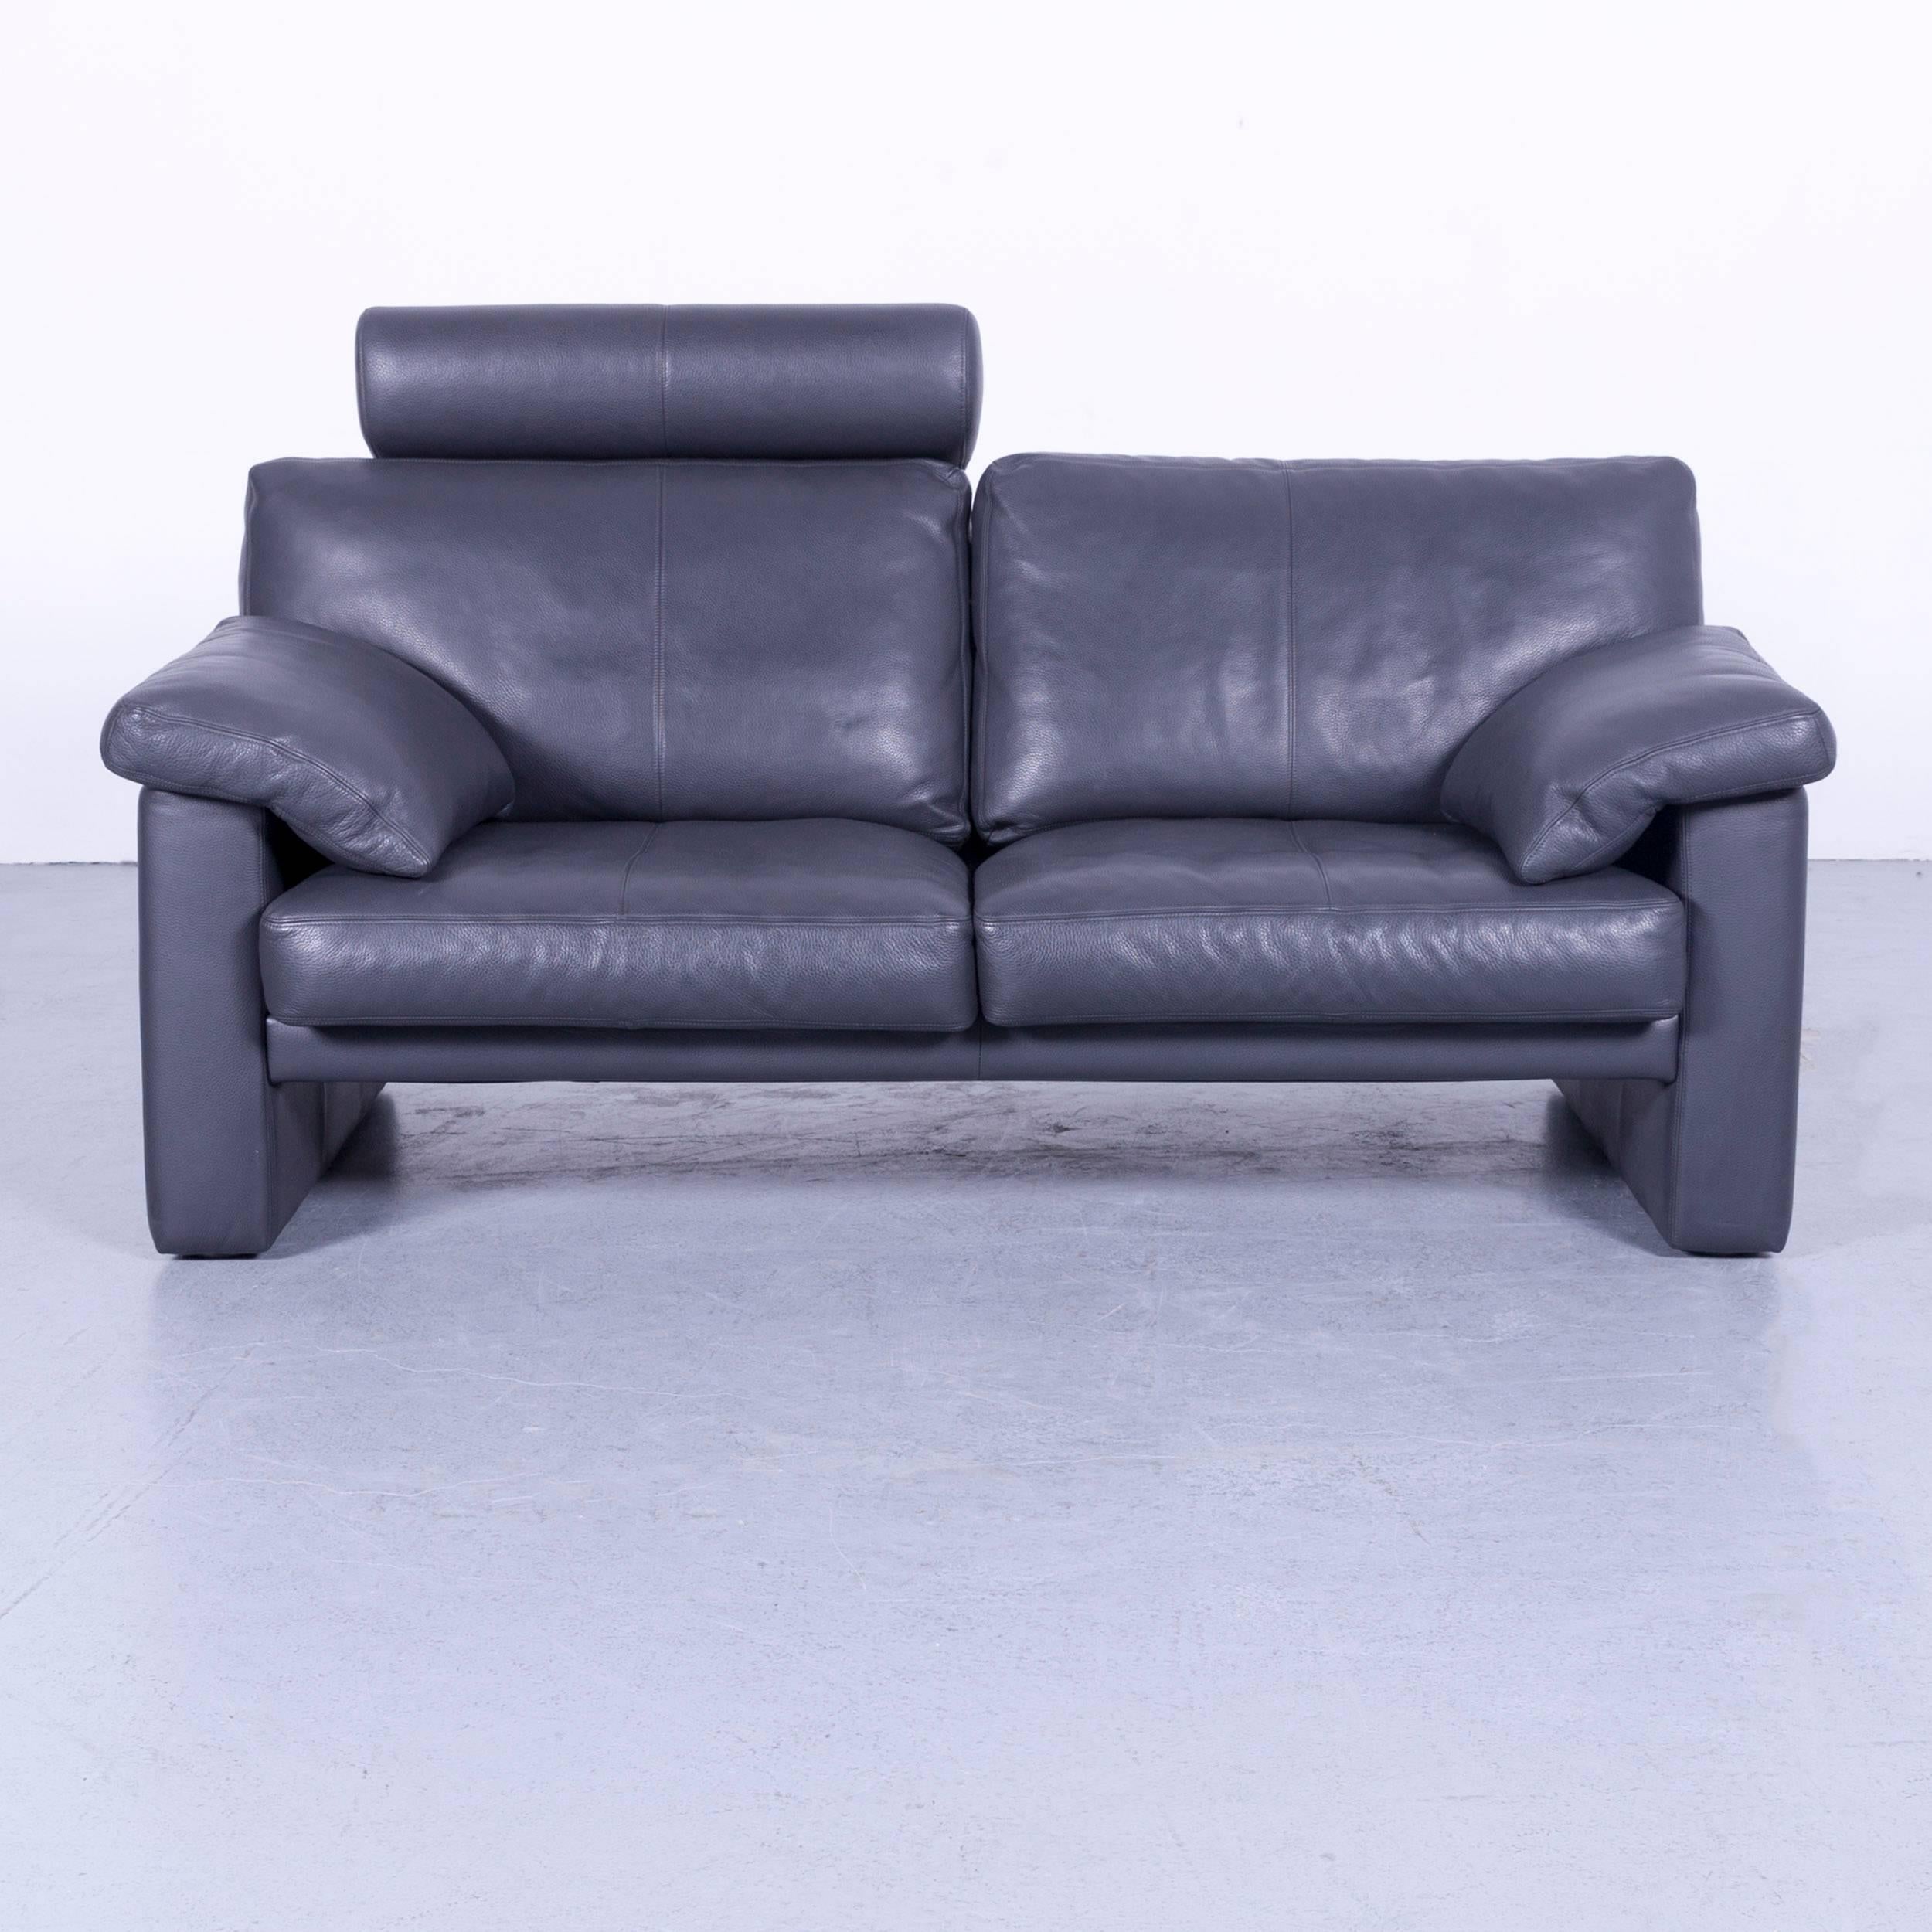 Erpo CL 300 Sofa Set of Two Leather Grey Three/Two-Seat Couch 3